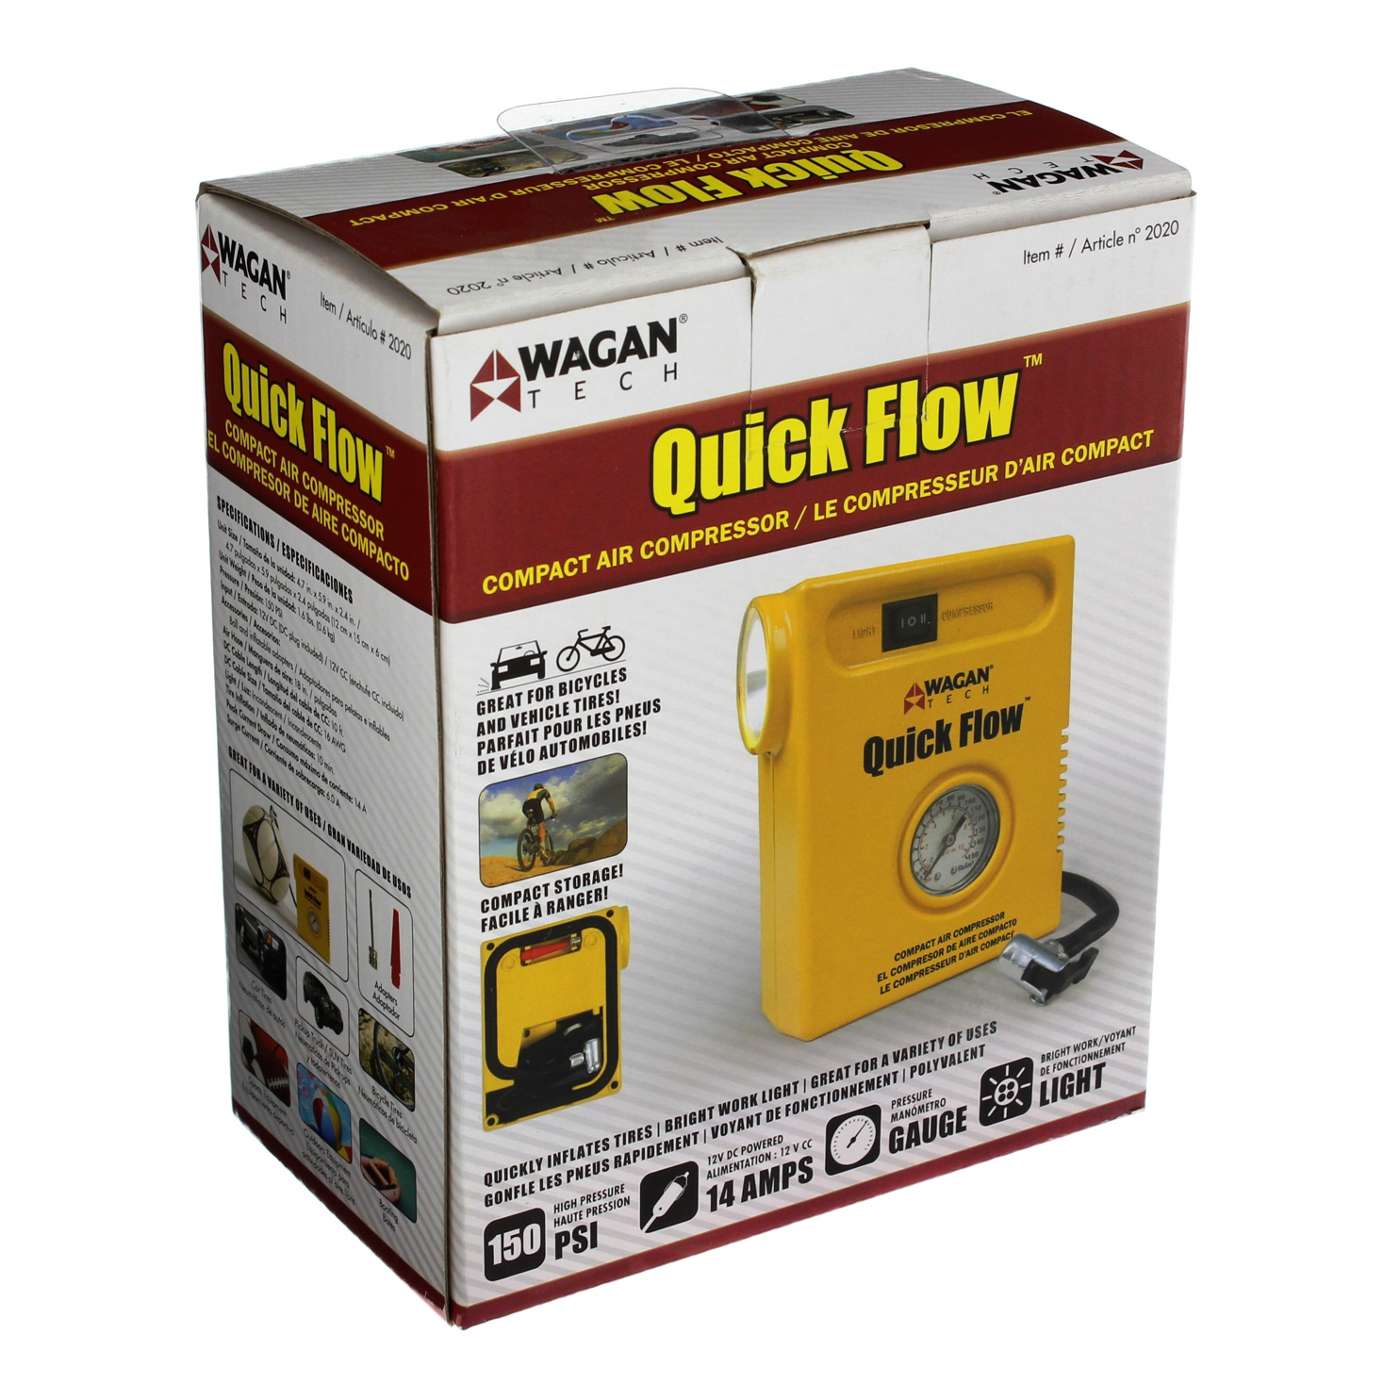 Wagan Quick Flow Compact Air Compressor; image 1 of 2